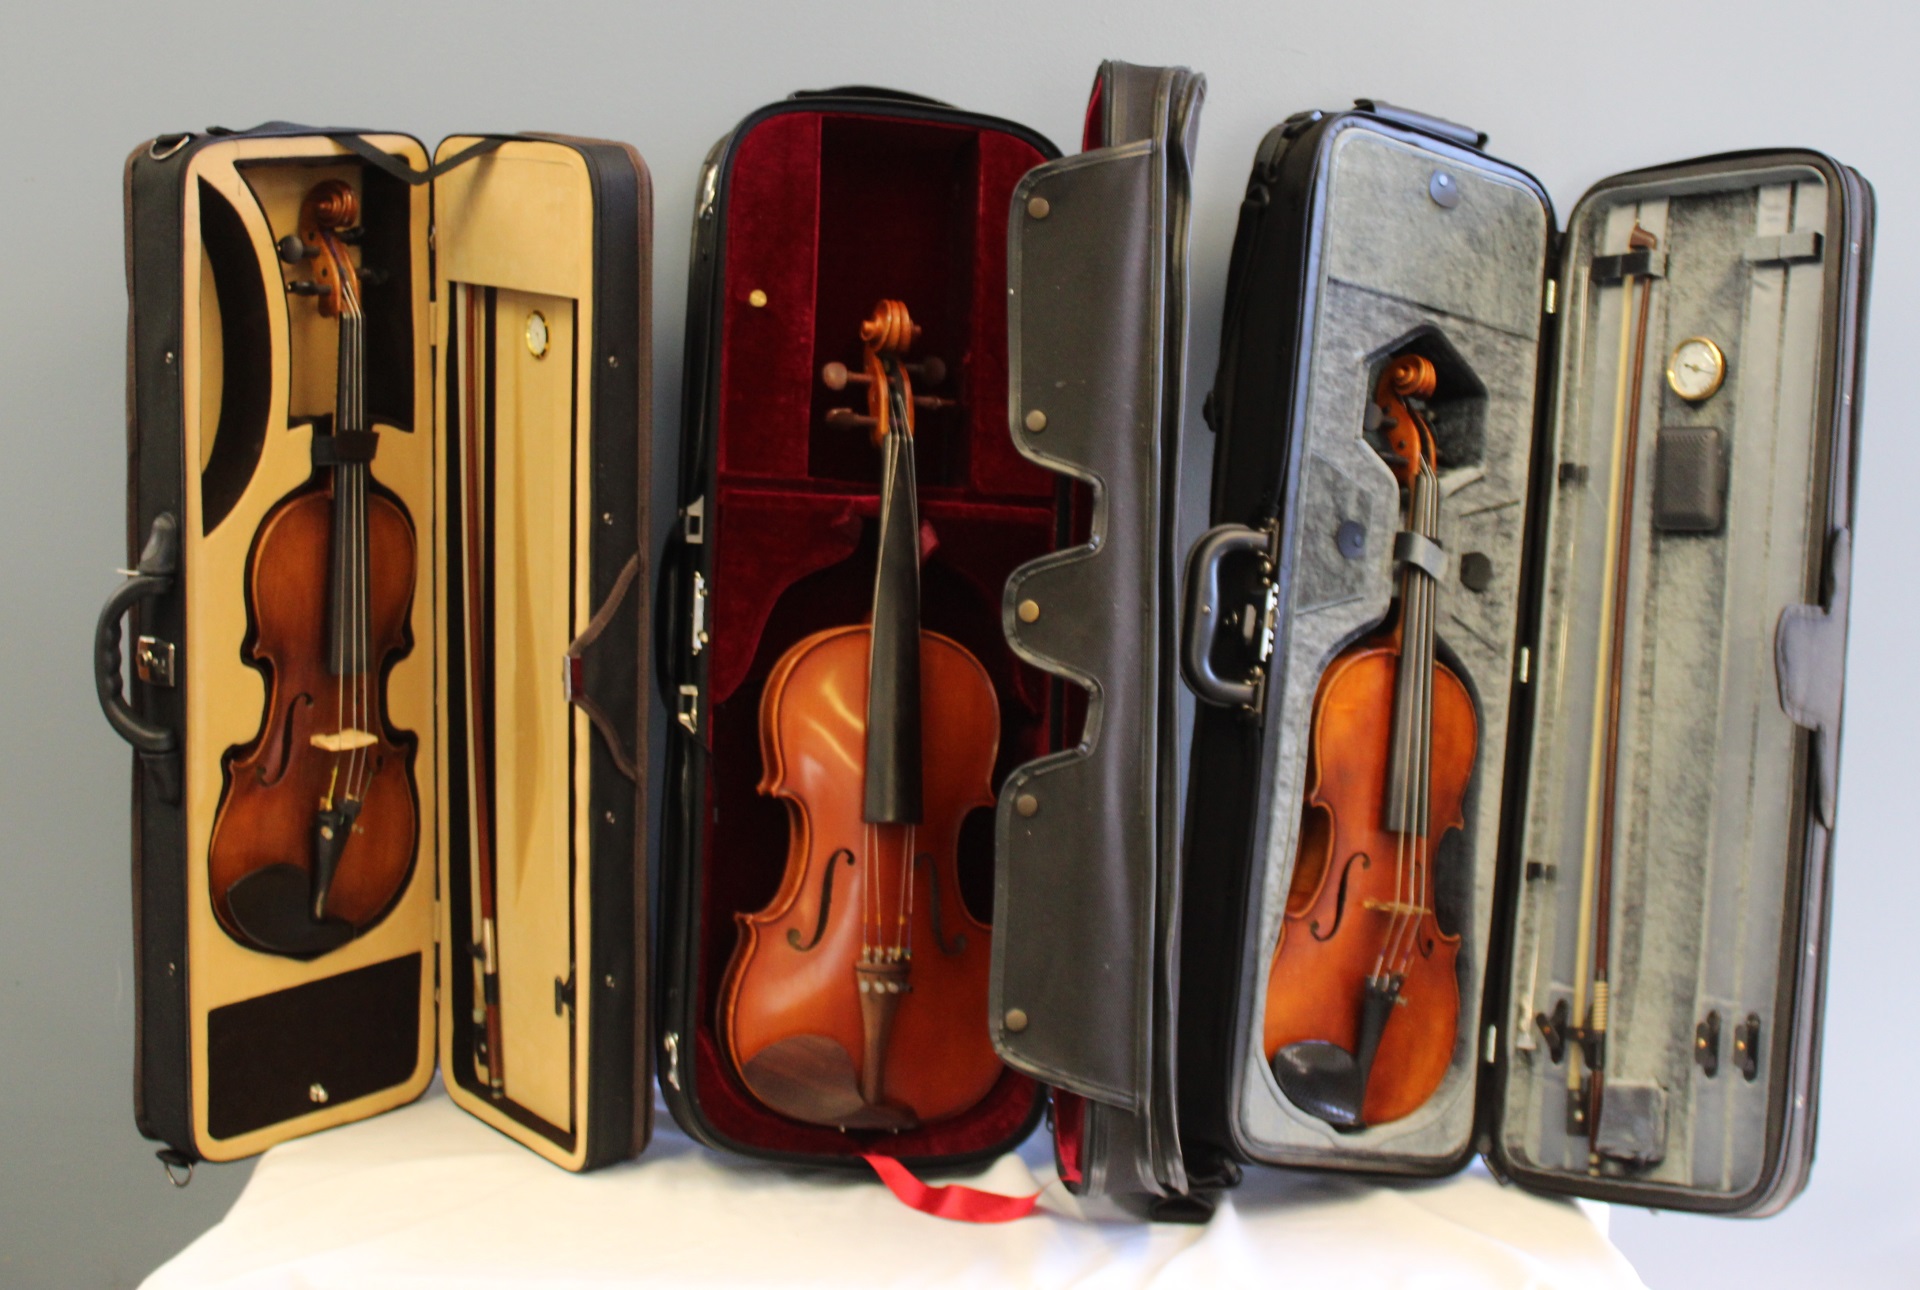 GROUP OF 3 VIOLINS IN SOFT CASES 3bc65a